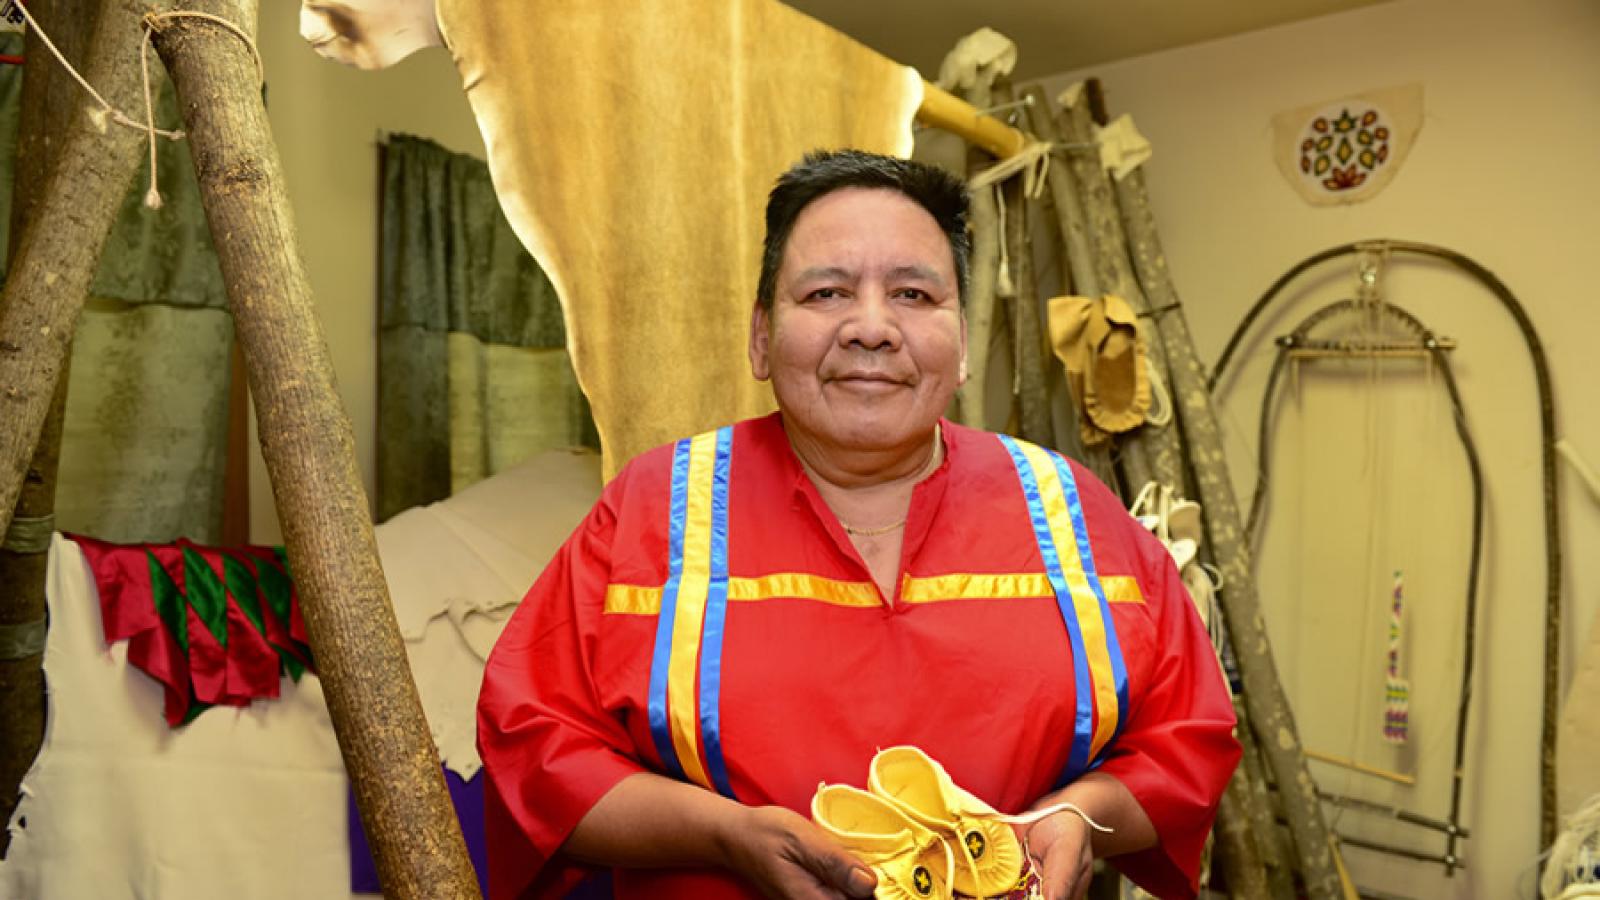 Standing in front of some of the tools of his craft, Gerald Hawpetoss smiles and holds a pair of small moccassins and an example of his beadwork.